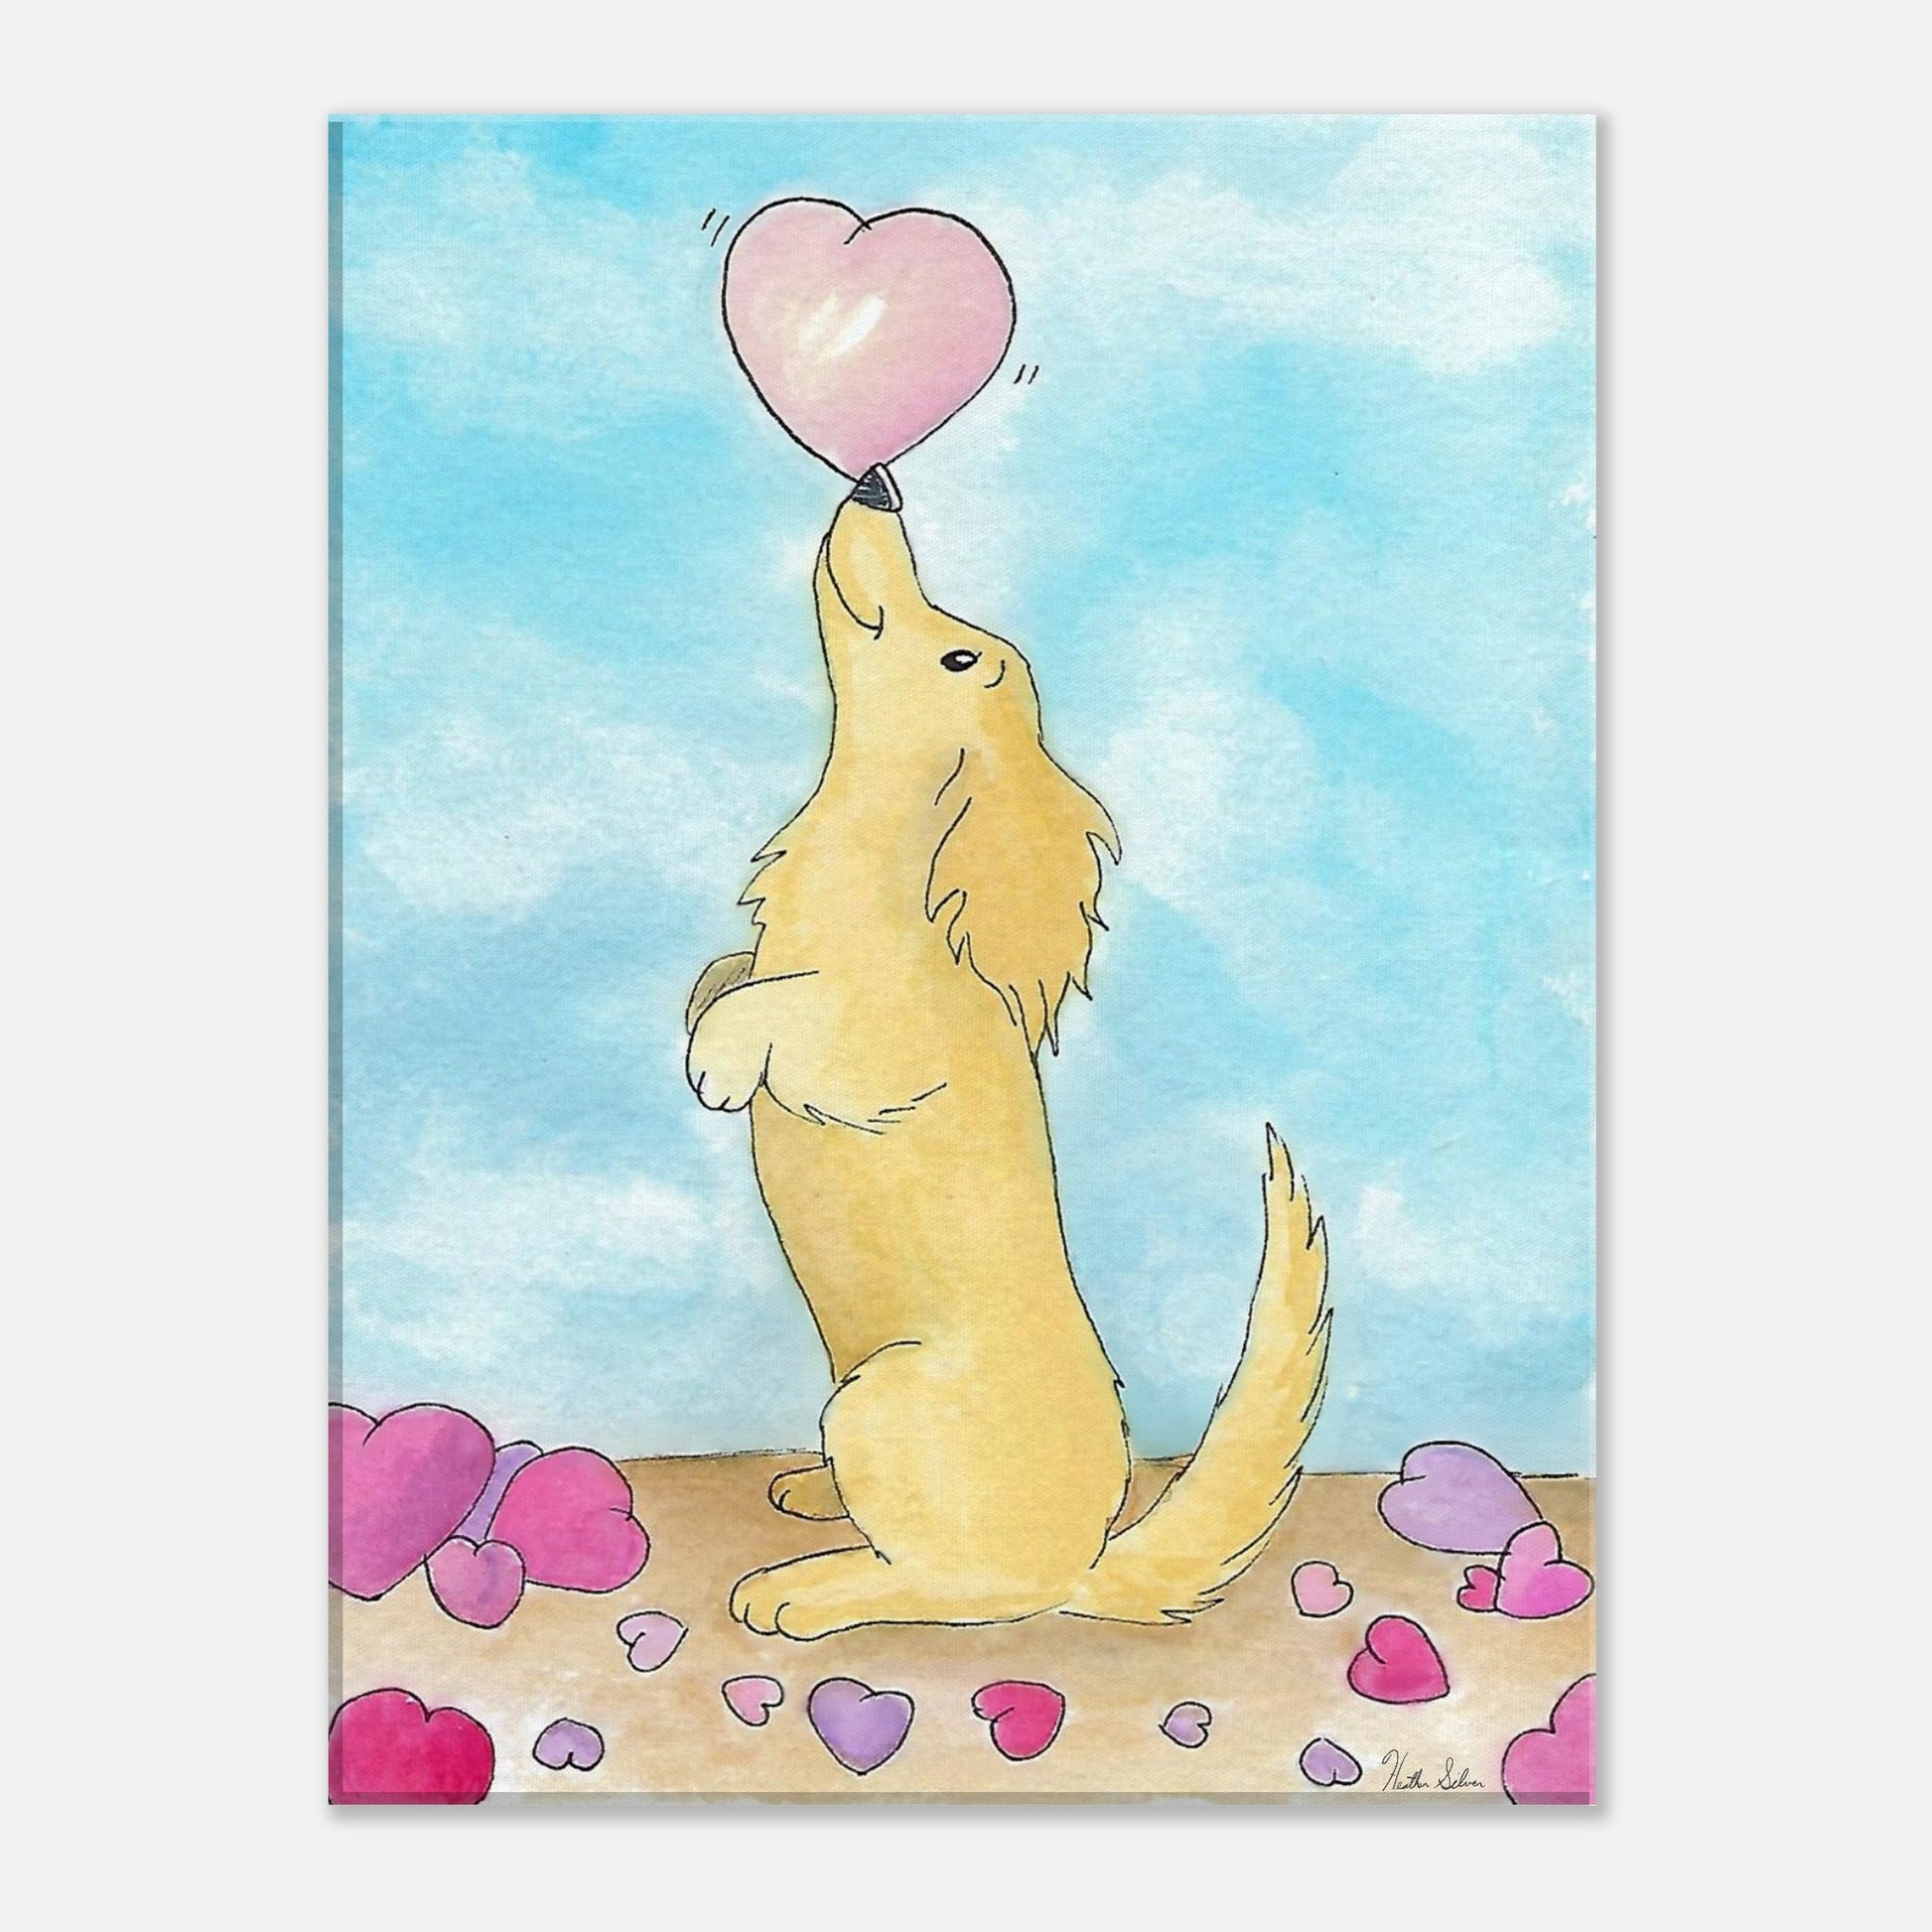 16 by 20 inch canvas wall art print of Heather Silver's watercolor painting, Puppy Love. It features a cute dog balancing a pink heart on its nose against a blue sky background.